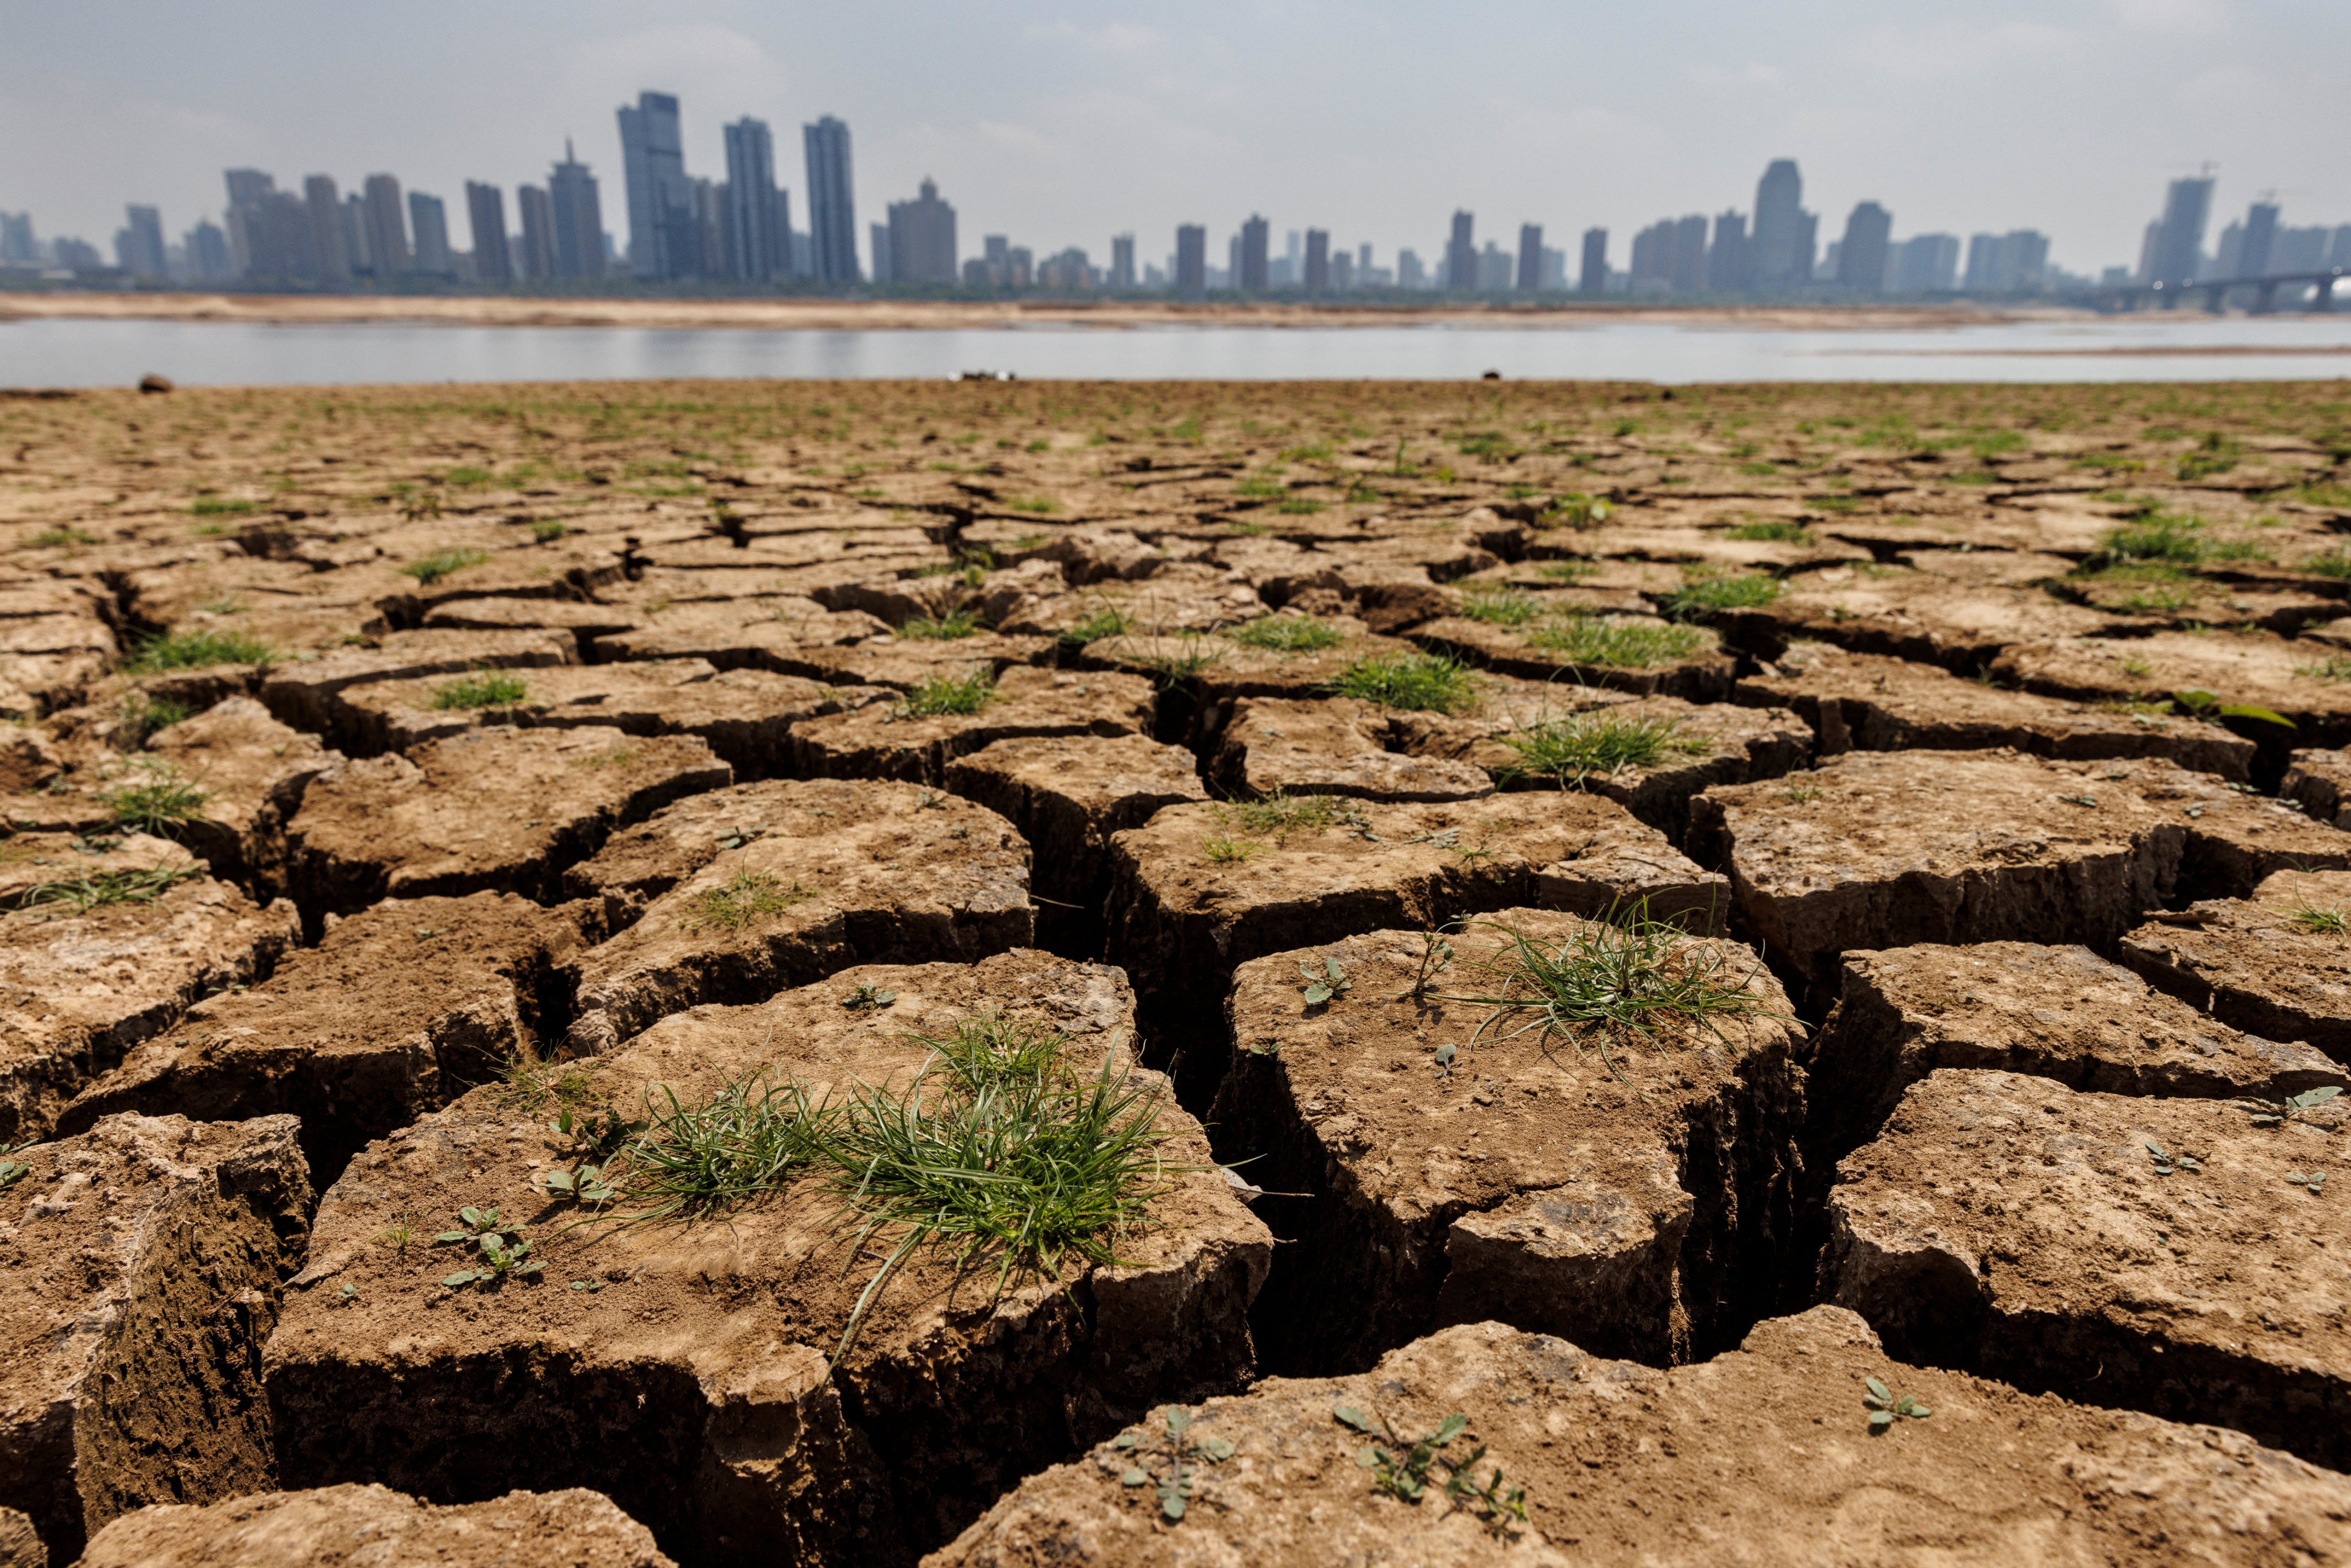 Drought conditions in China’s southwest could affect power production as well as agriculture. Photo: Reuters